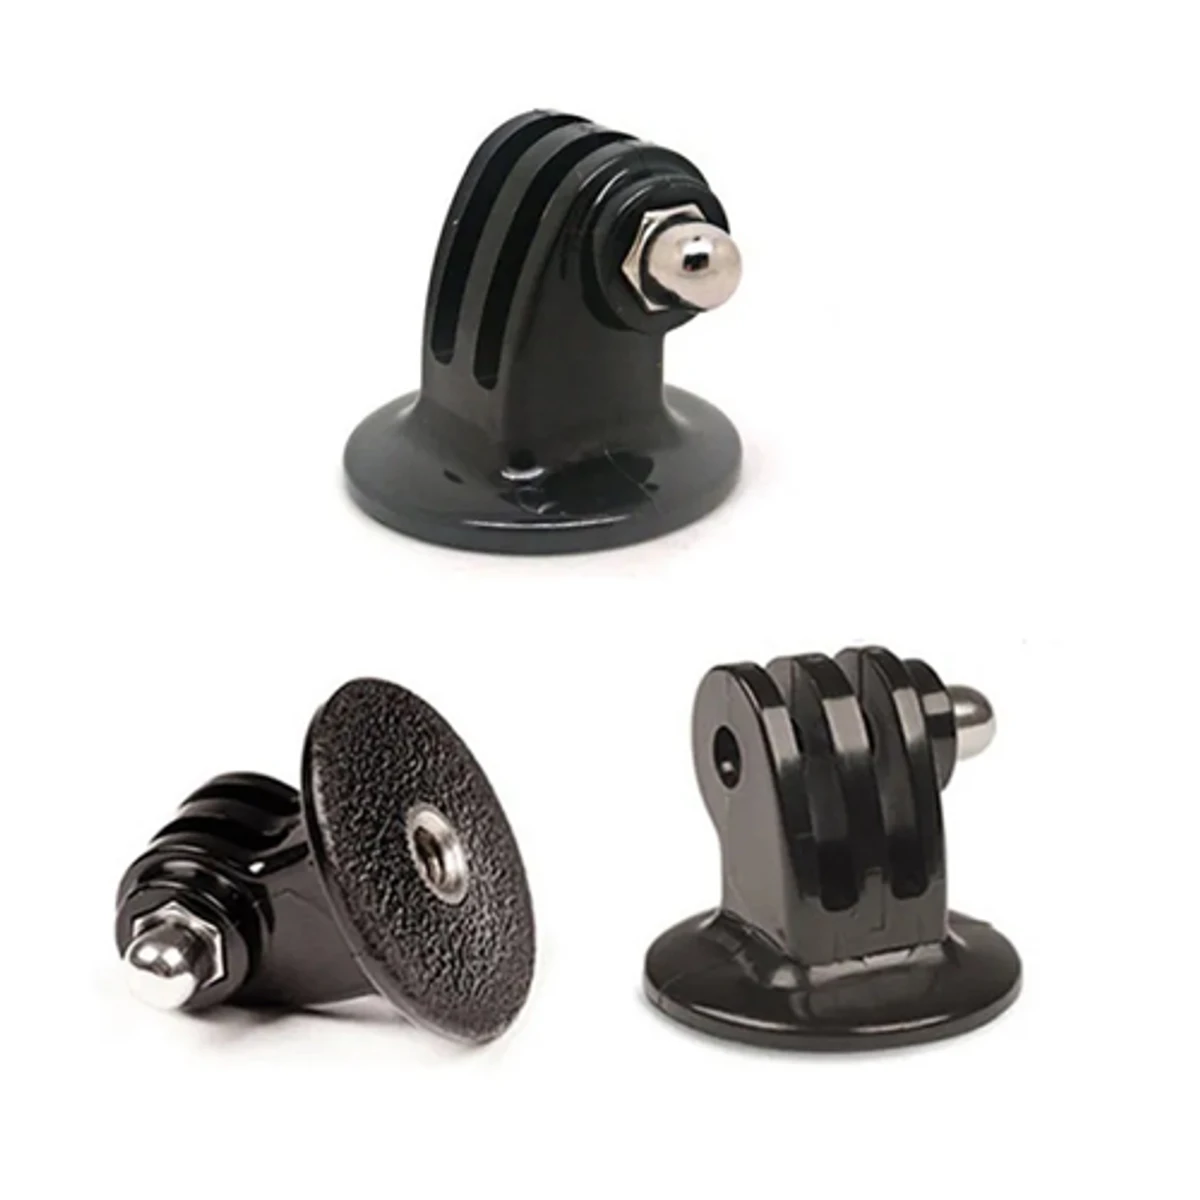 Tripod Screw Mount For Action Camera